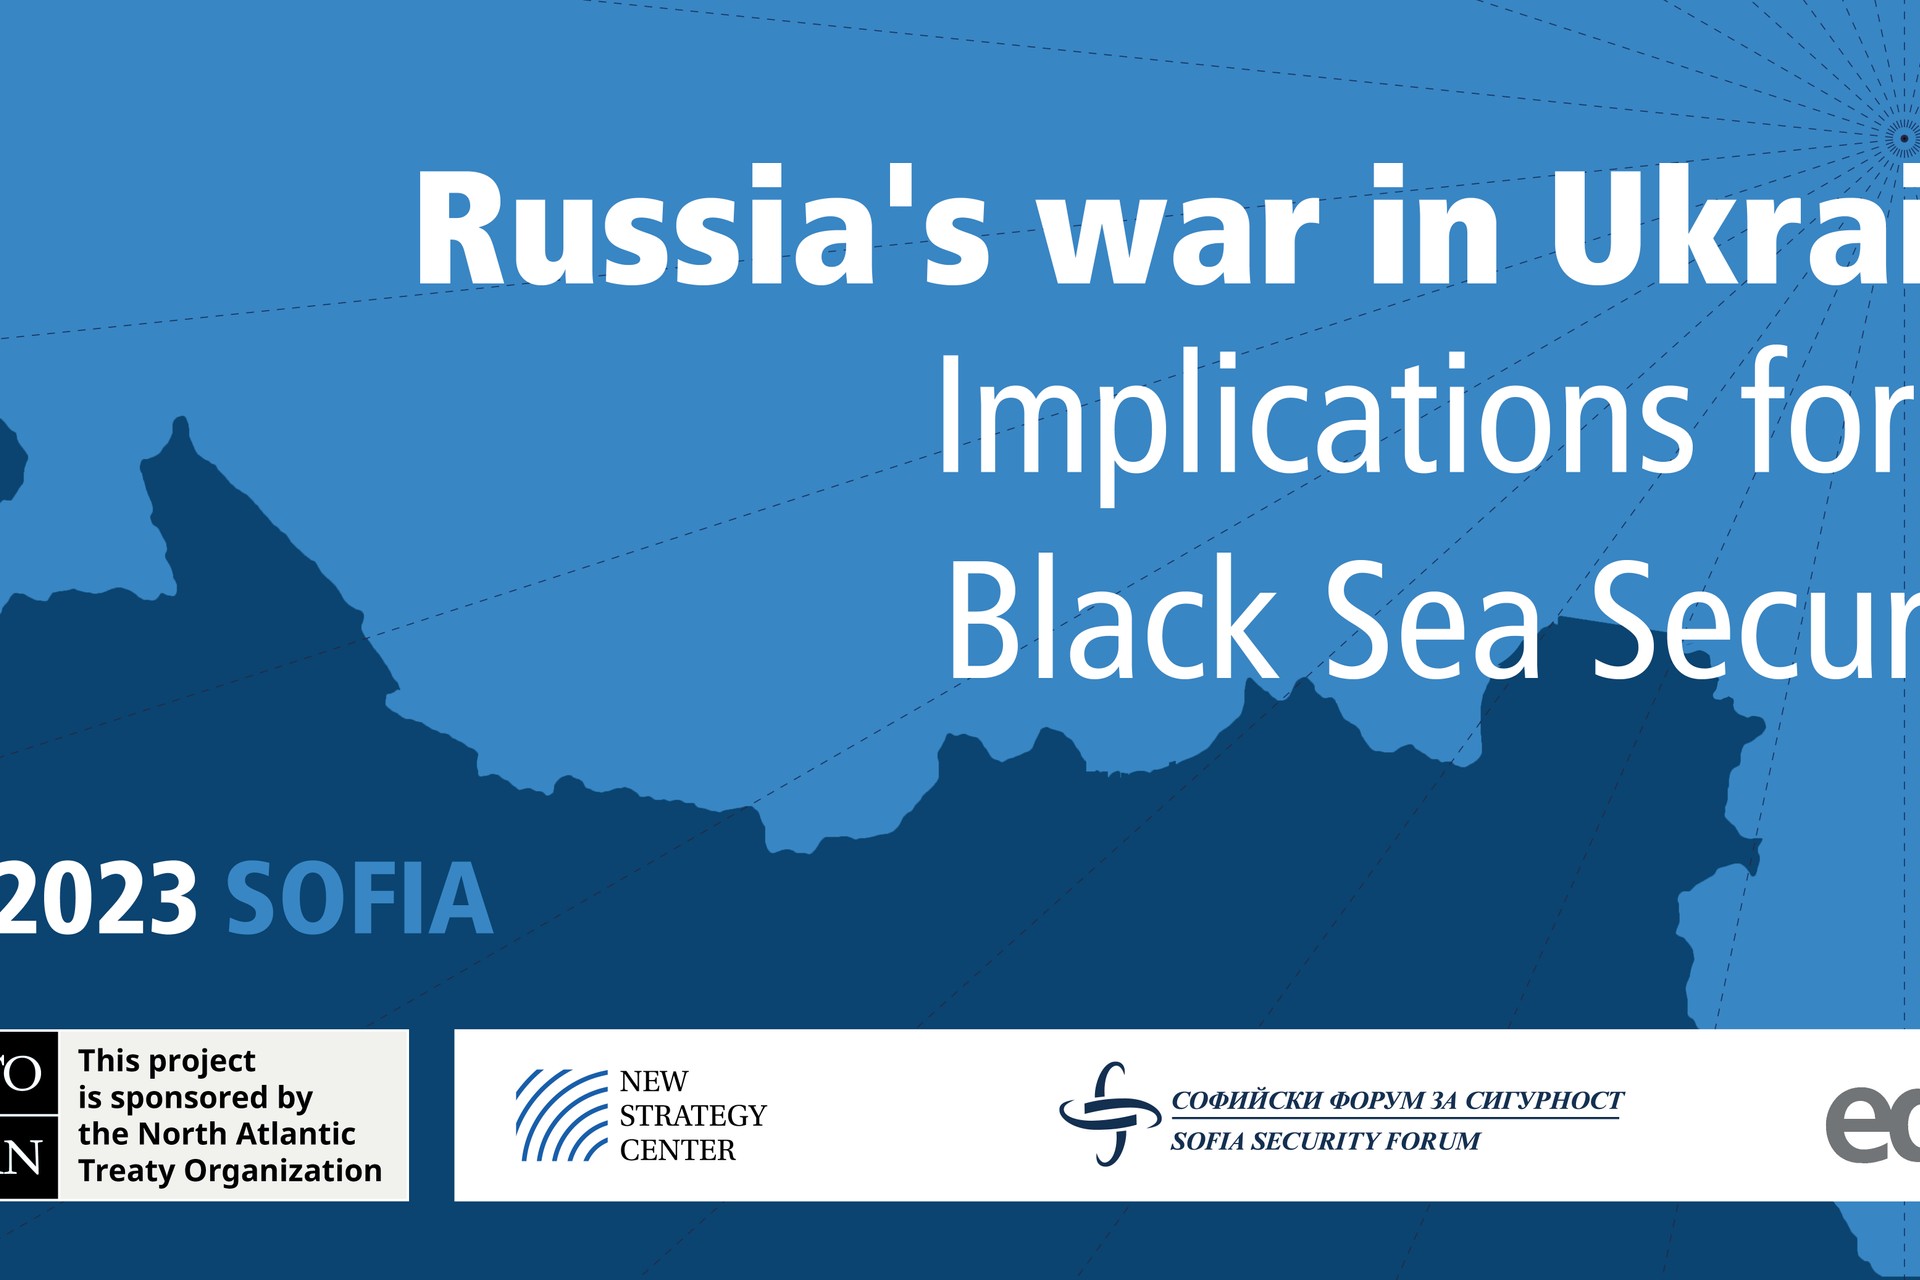 NATO’S APPROACH TO THE SECURITY IN THE BLACK SEA REGION